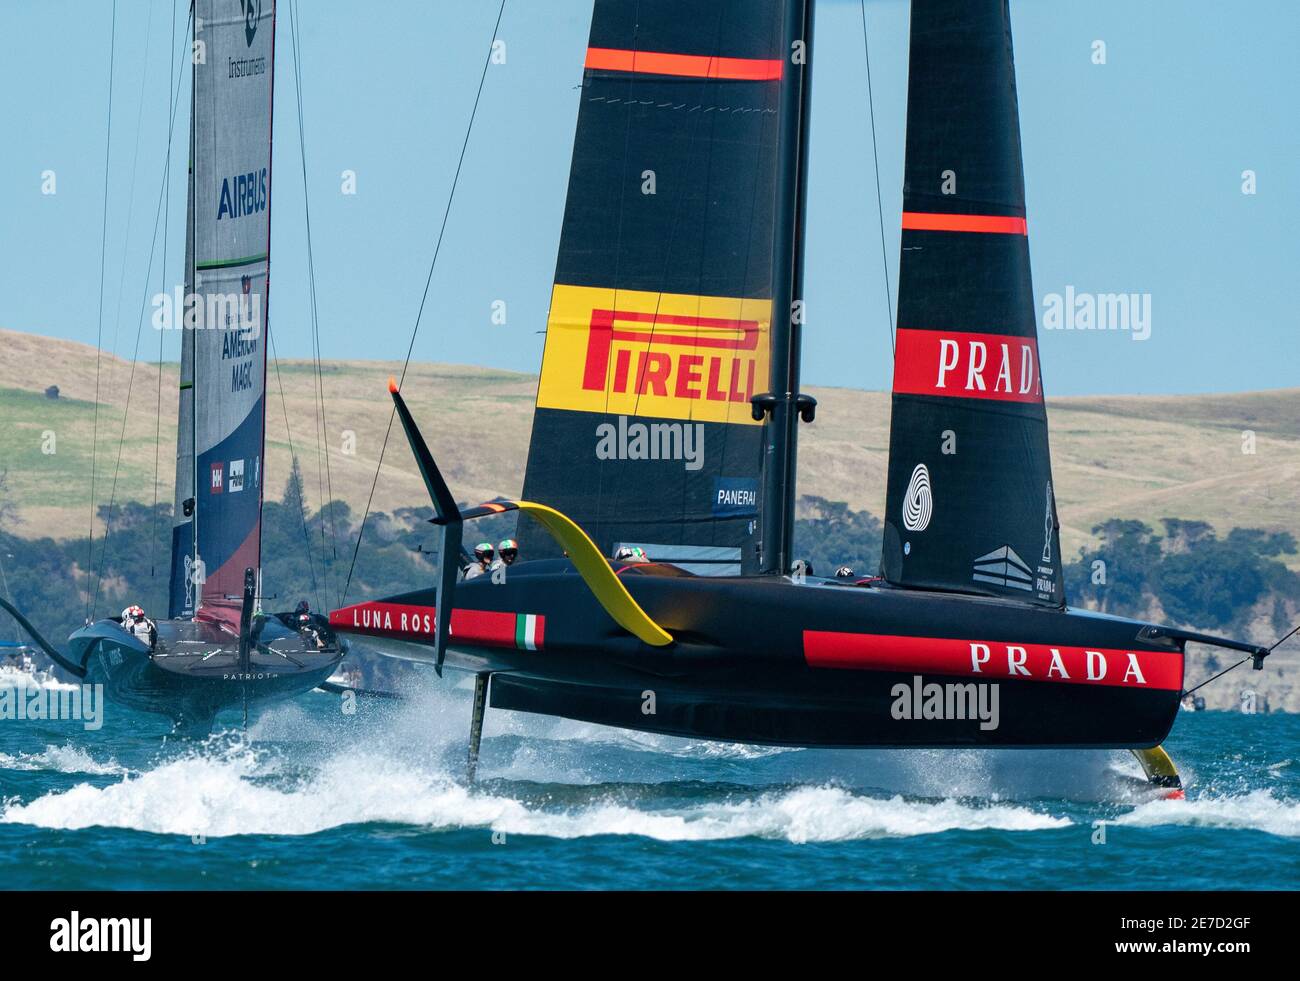 Auckland, New Zealand, 30 January, 2021 -  Italian team Luna Rossa Prada Pirelli skippered by Max Sirena and jointly helmed by Jimmy Spithill and Francesco Bruni, in action against New York Yacht Club American Magic team on Patriot, skippered by Terry Hutchinson and helmed by Dean Barker during the Prada Cup semi-finals on the Waitemata Harbour of Auckland. The Italian team won both both races today and progress to the Prada Cup finals, starting February 12, where they will meet INEOS Team UK's boat Britannia, skippered by Sir Ben Ainslie  Credit: Rob Taggart/Alamy Live News Stock Photo